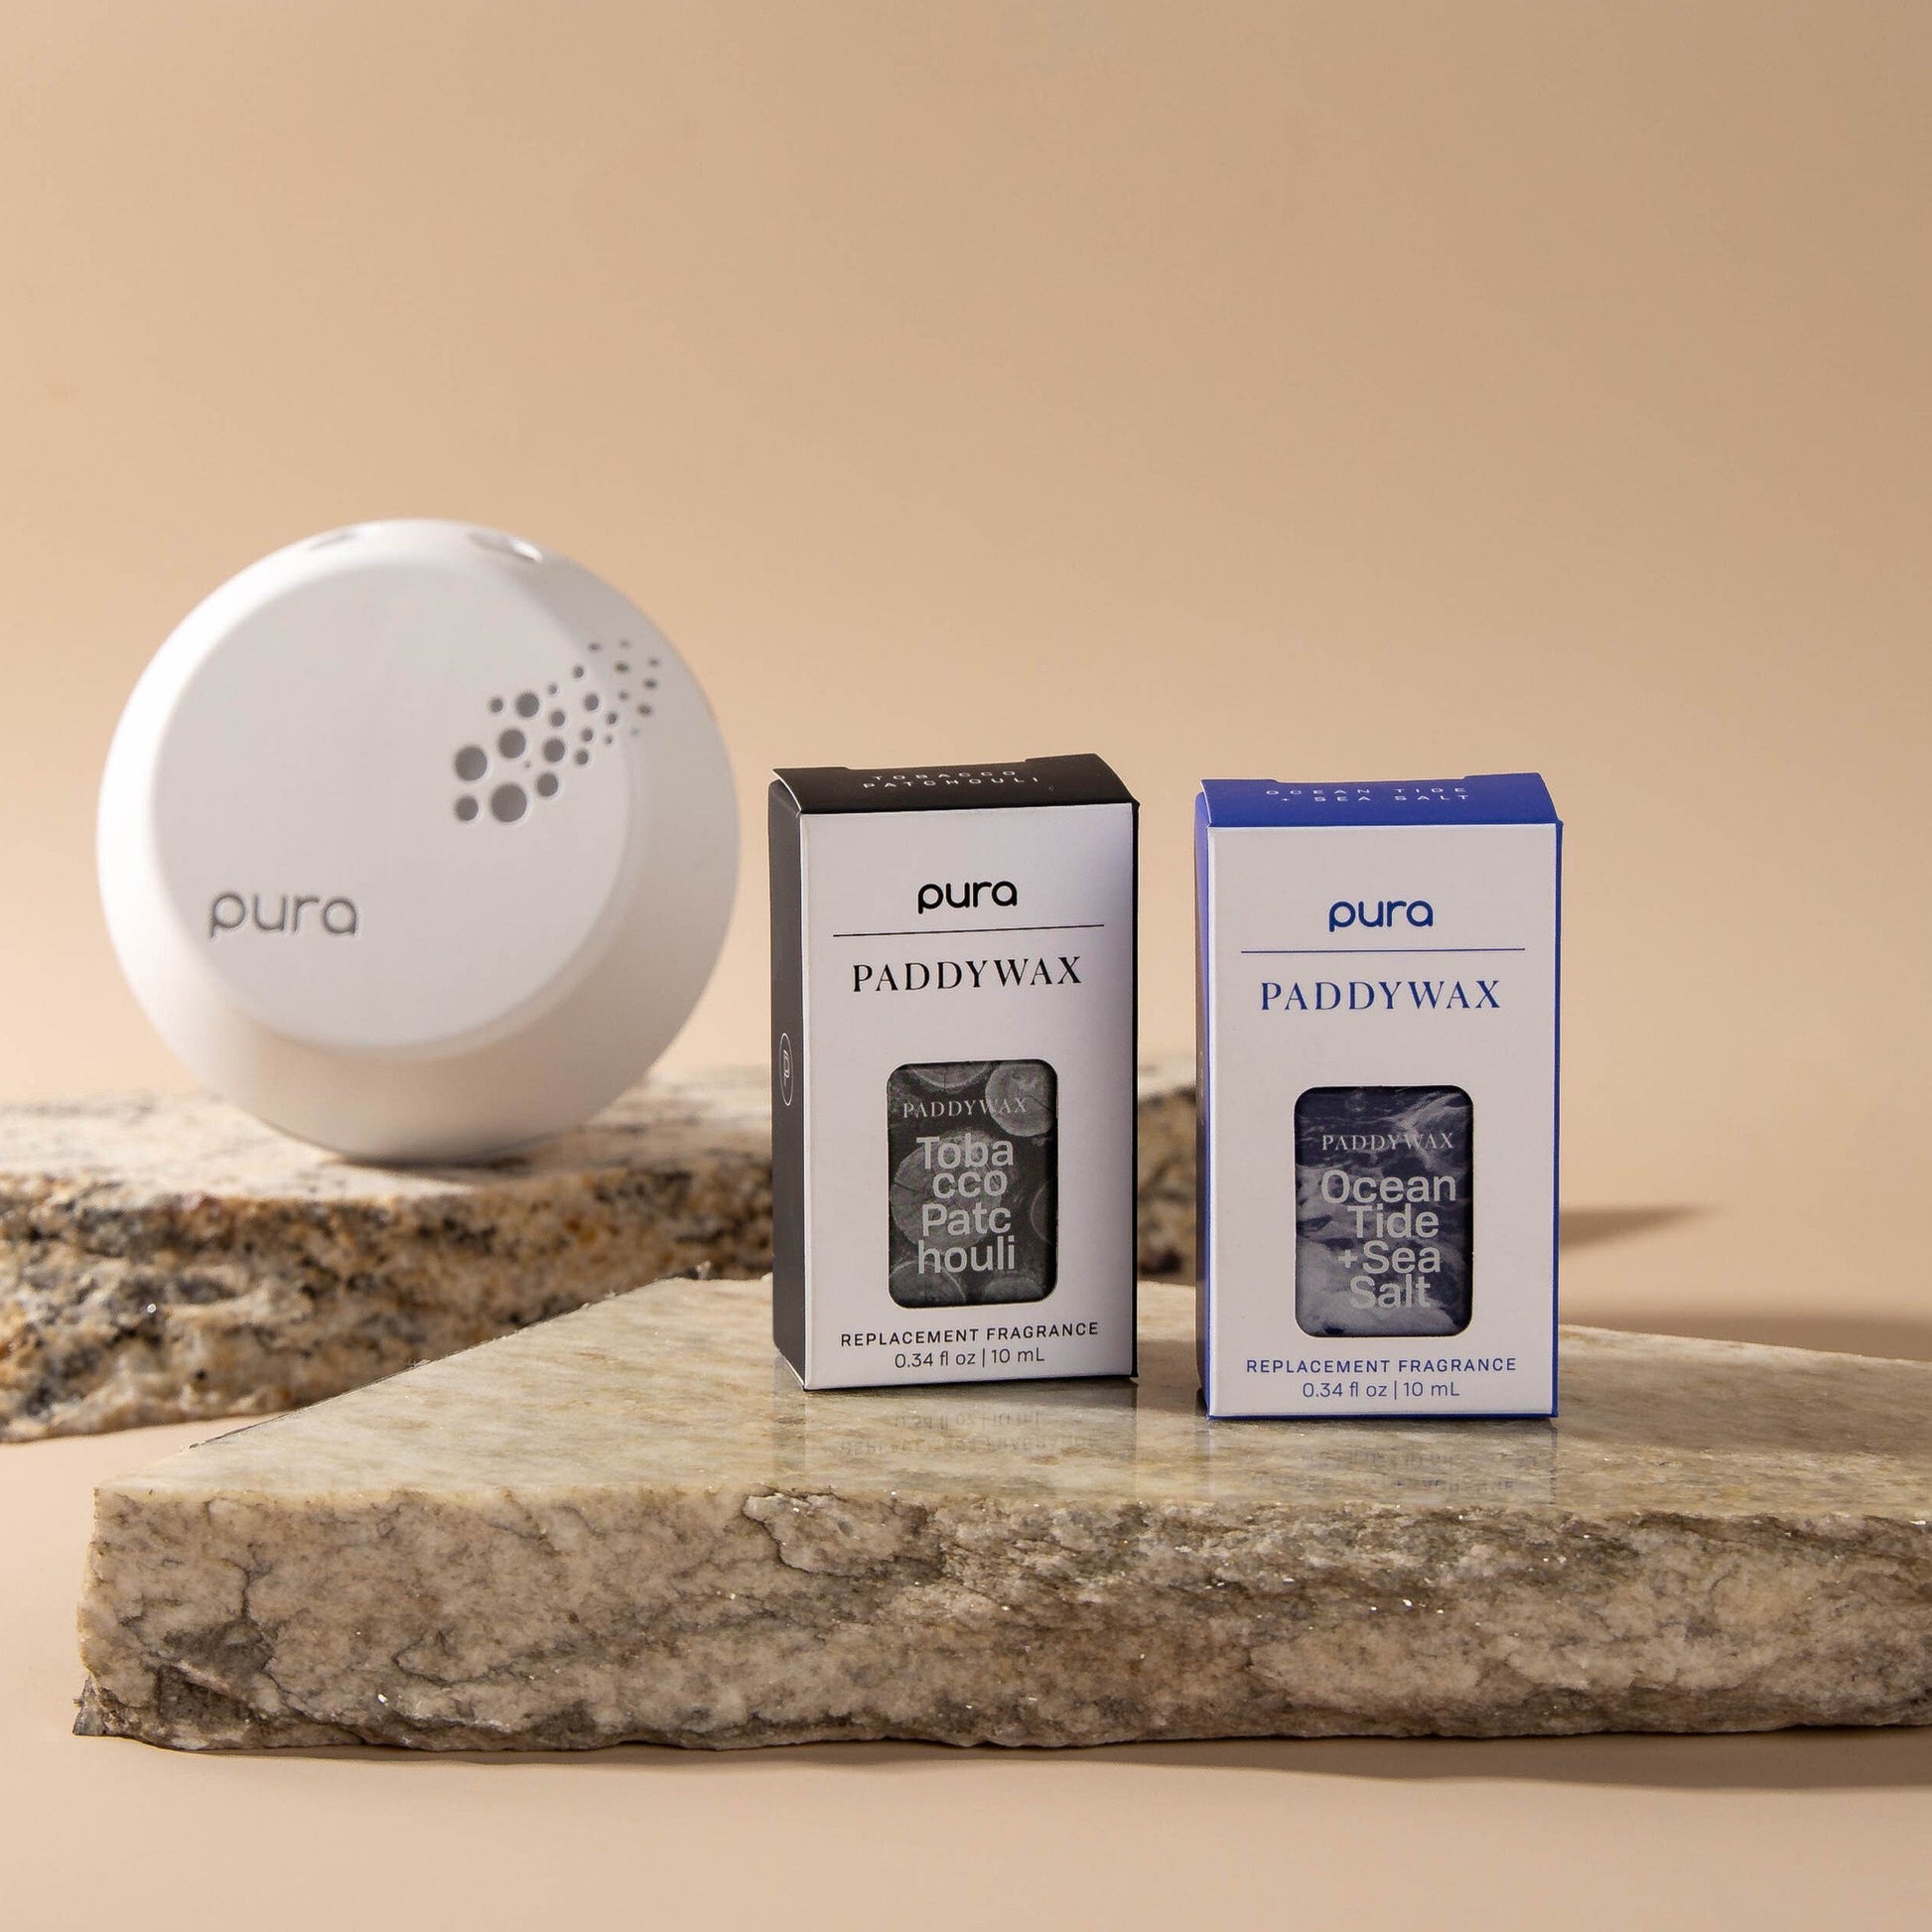 Pura Device with Paddywax Tobacca Patchouli and Ocean Tide Sea Salt fragrance refills